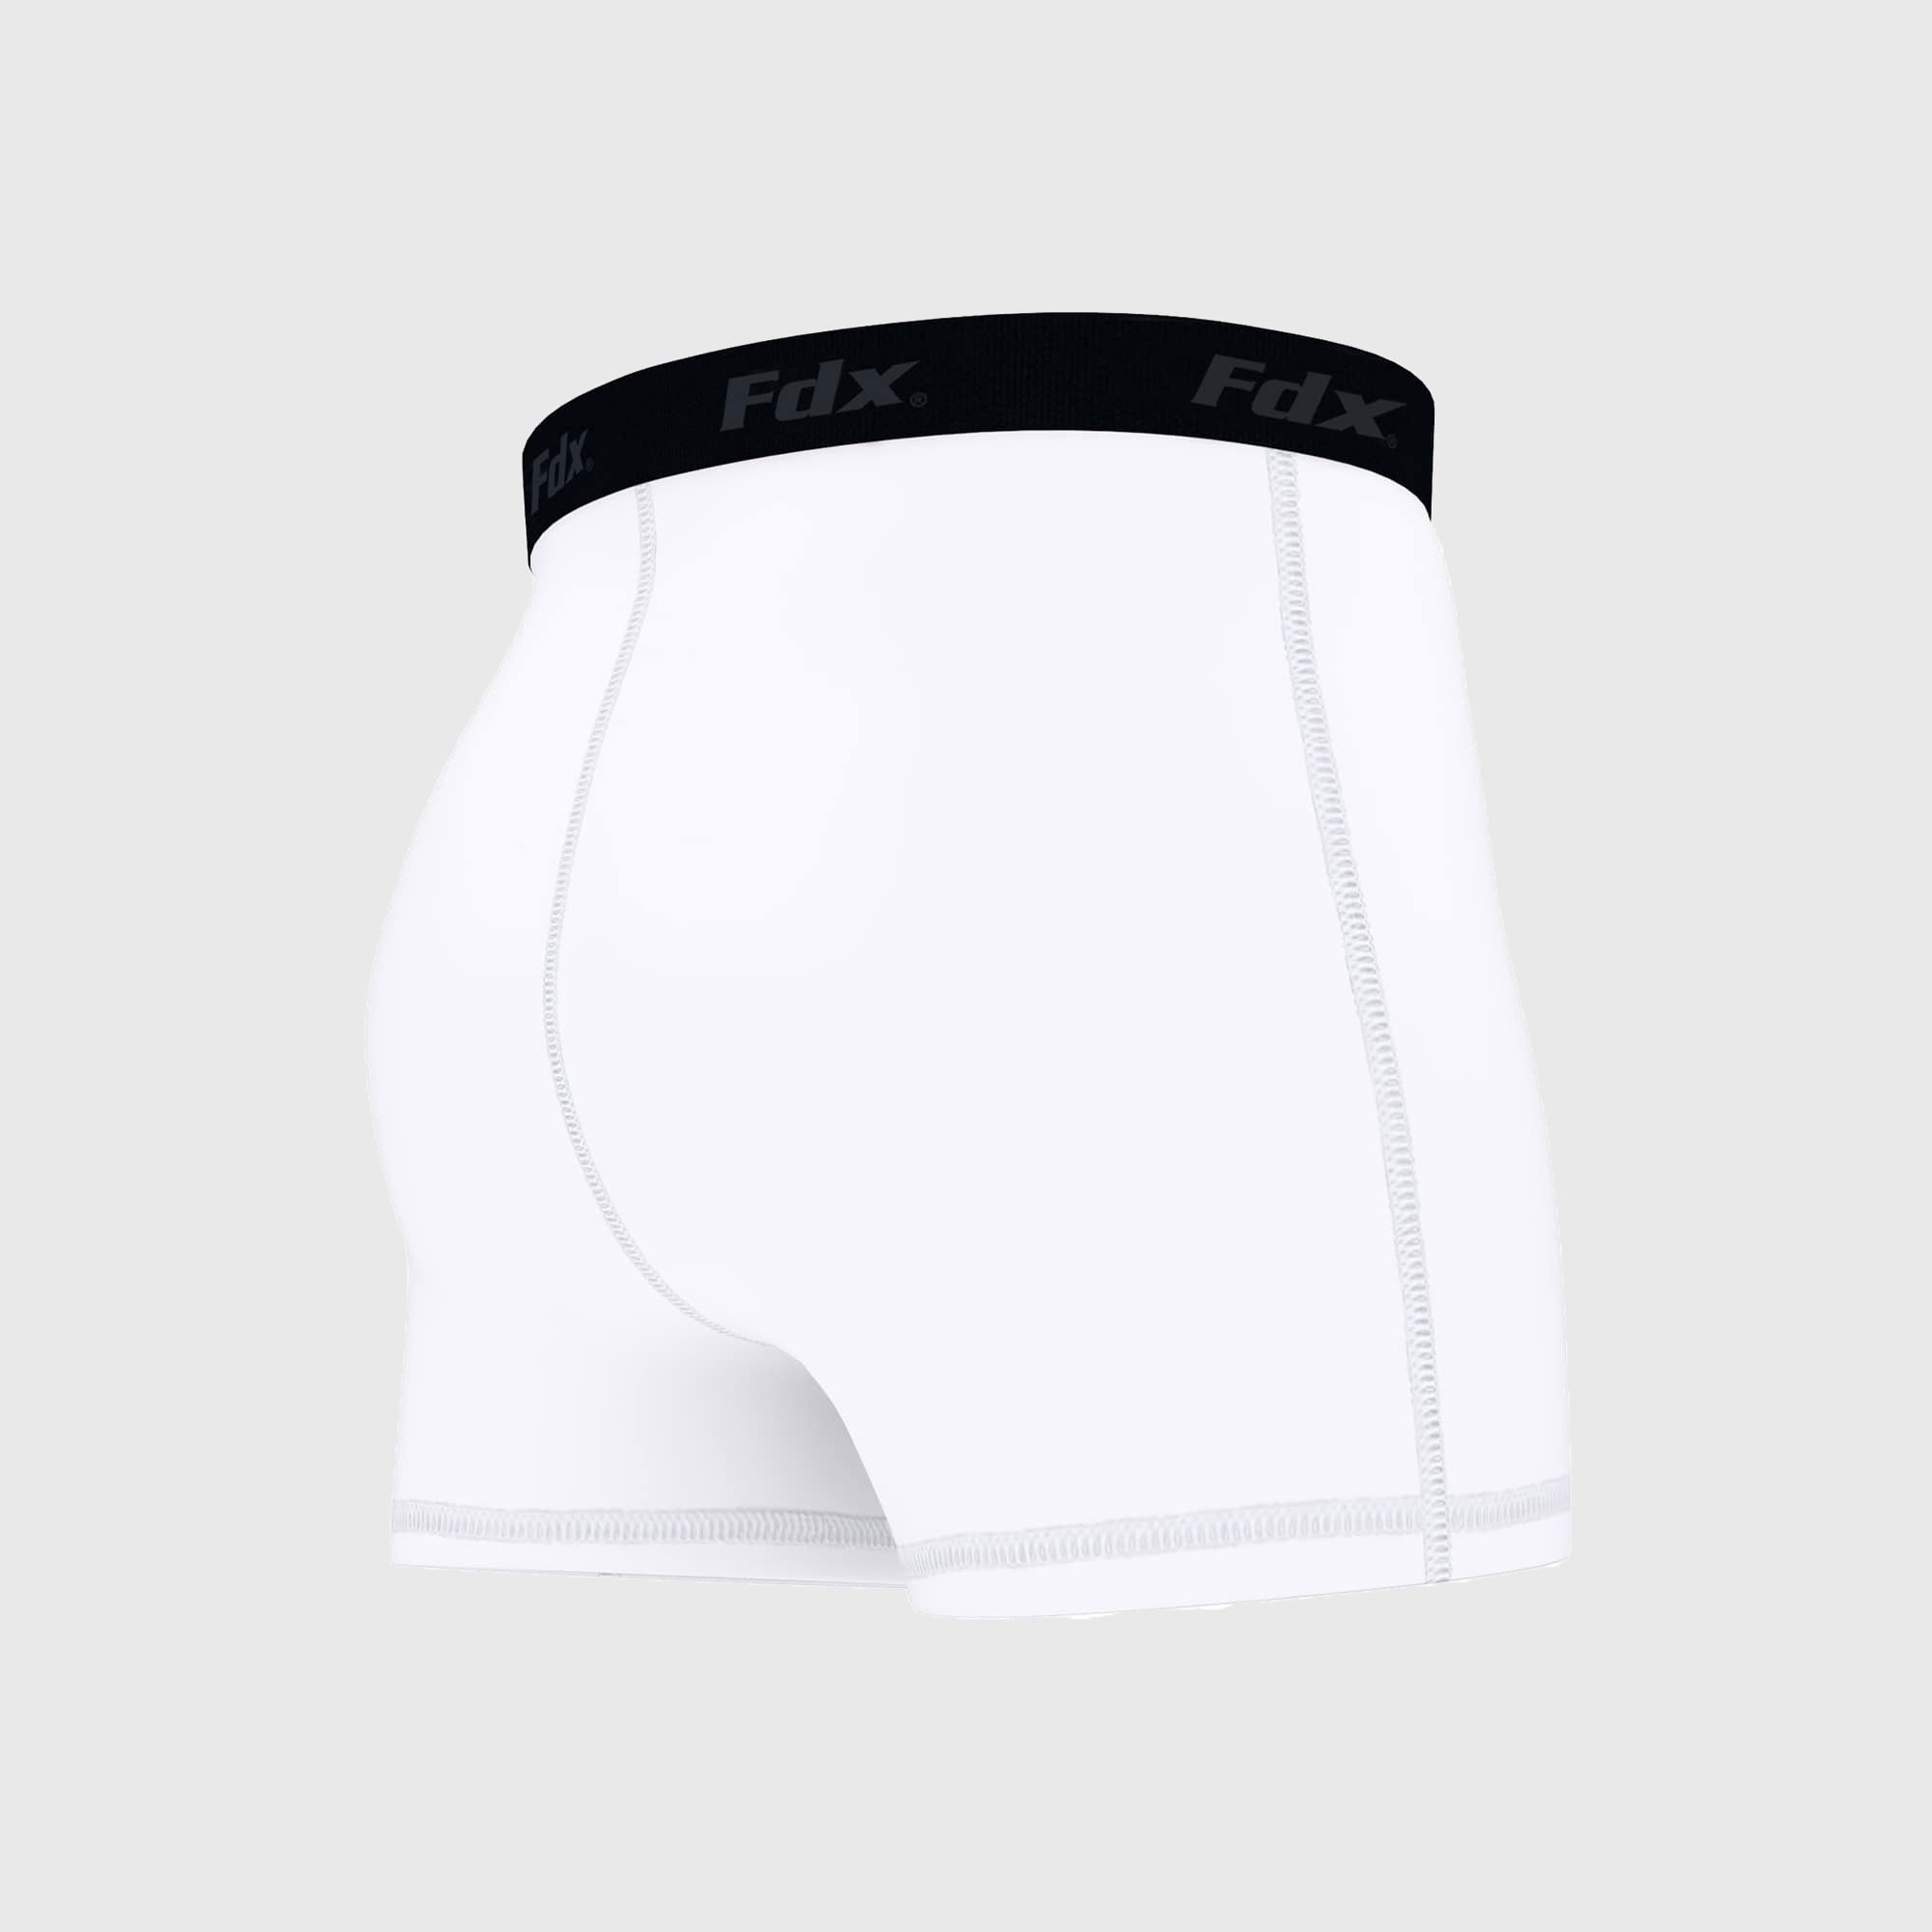 Buy Fdx Men's Padded & Compression Cycling Shorts